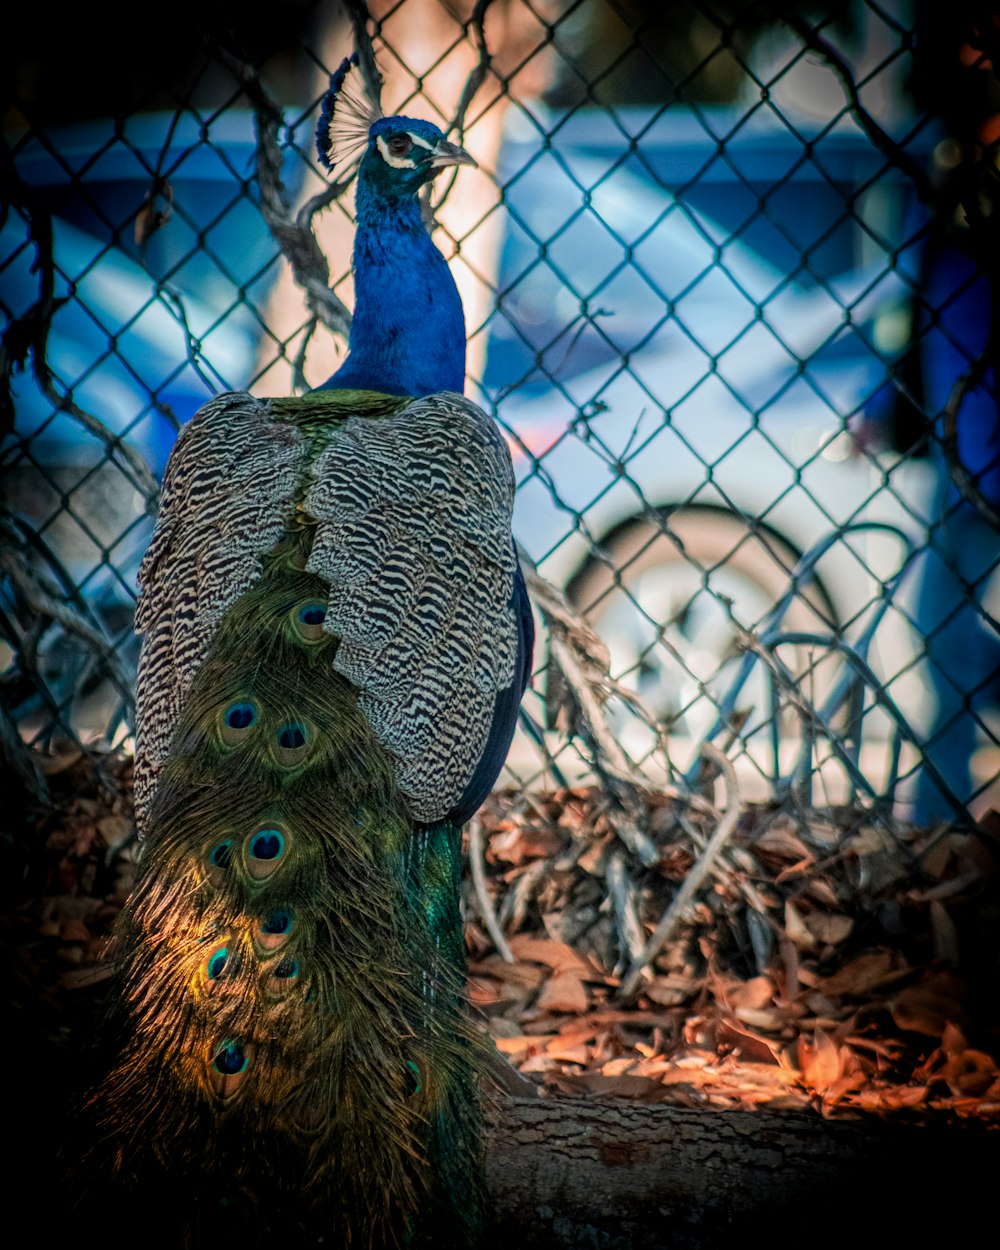 peacock in cage during daytime